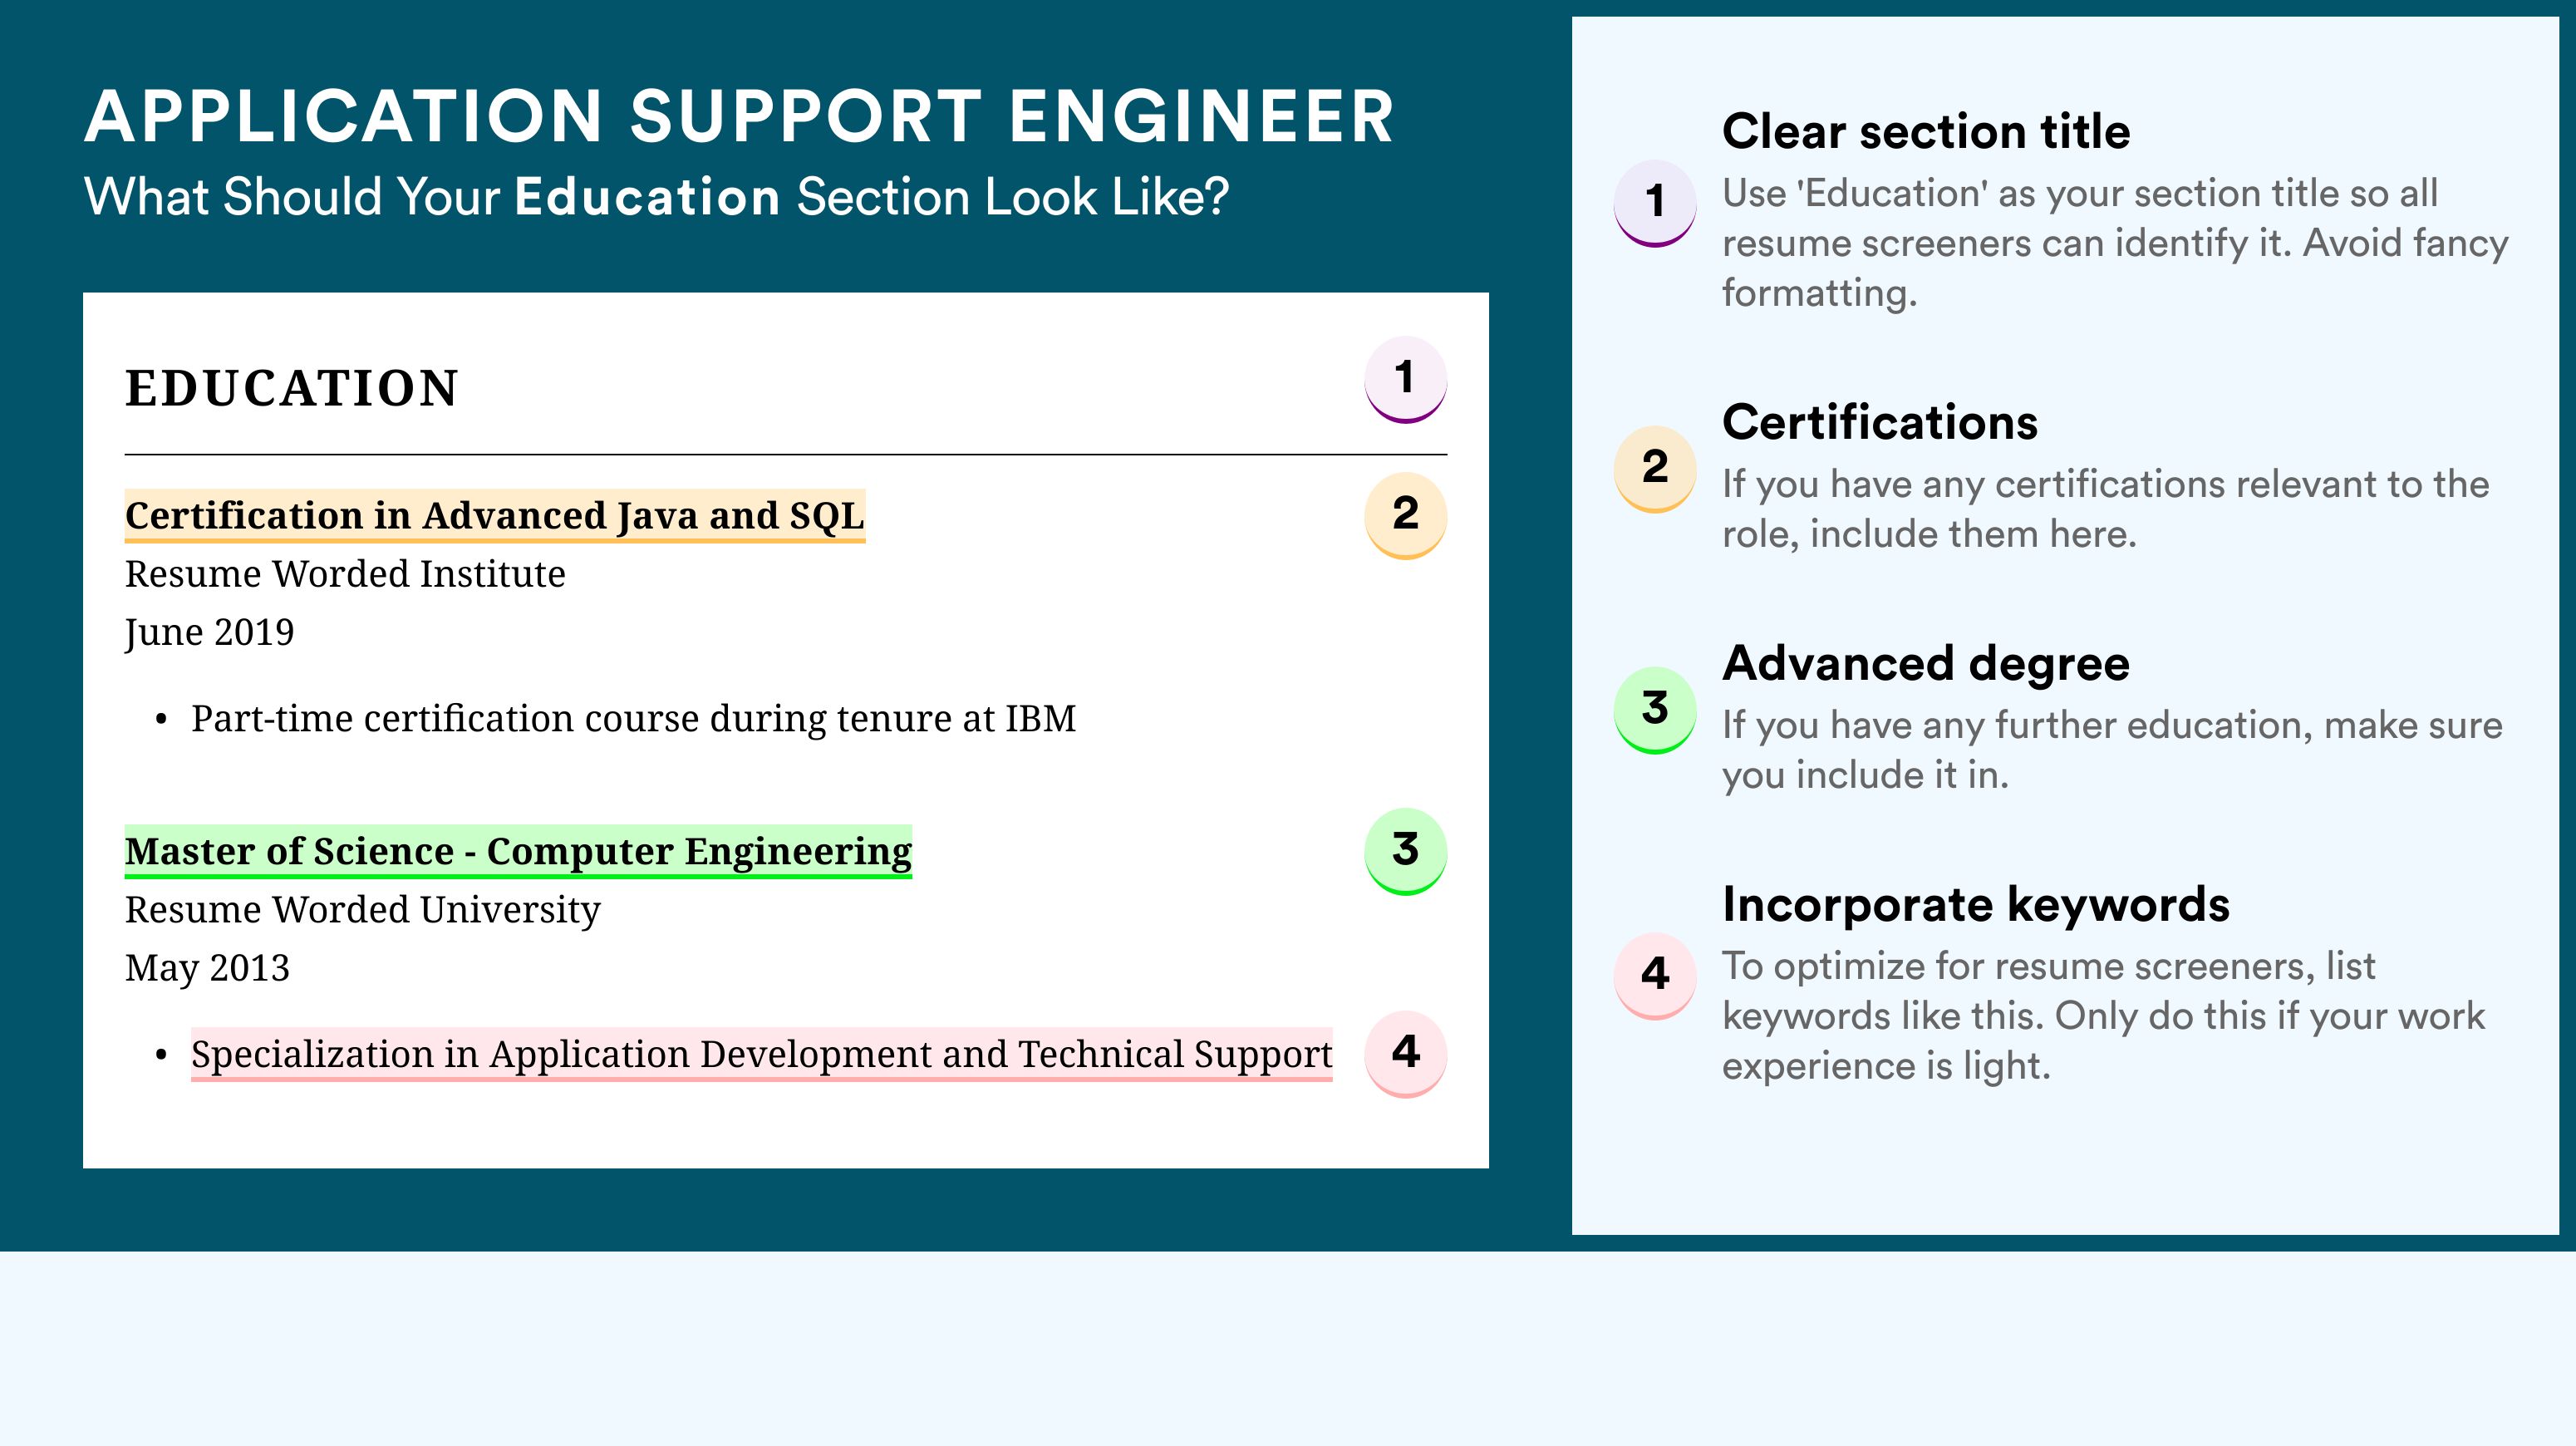 How To Write An Education Section - Application Support Engineer Roles